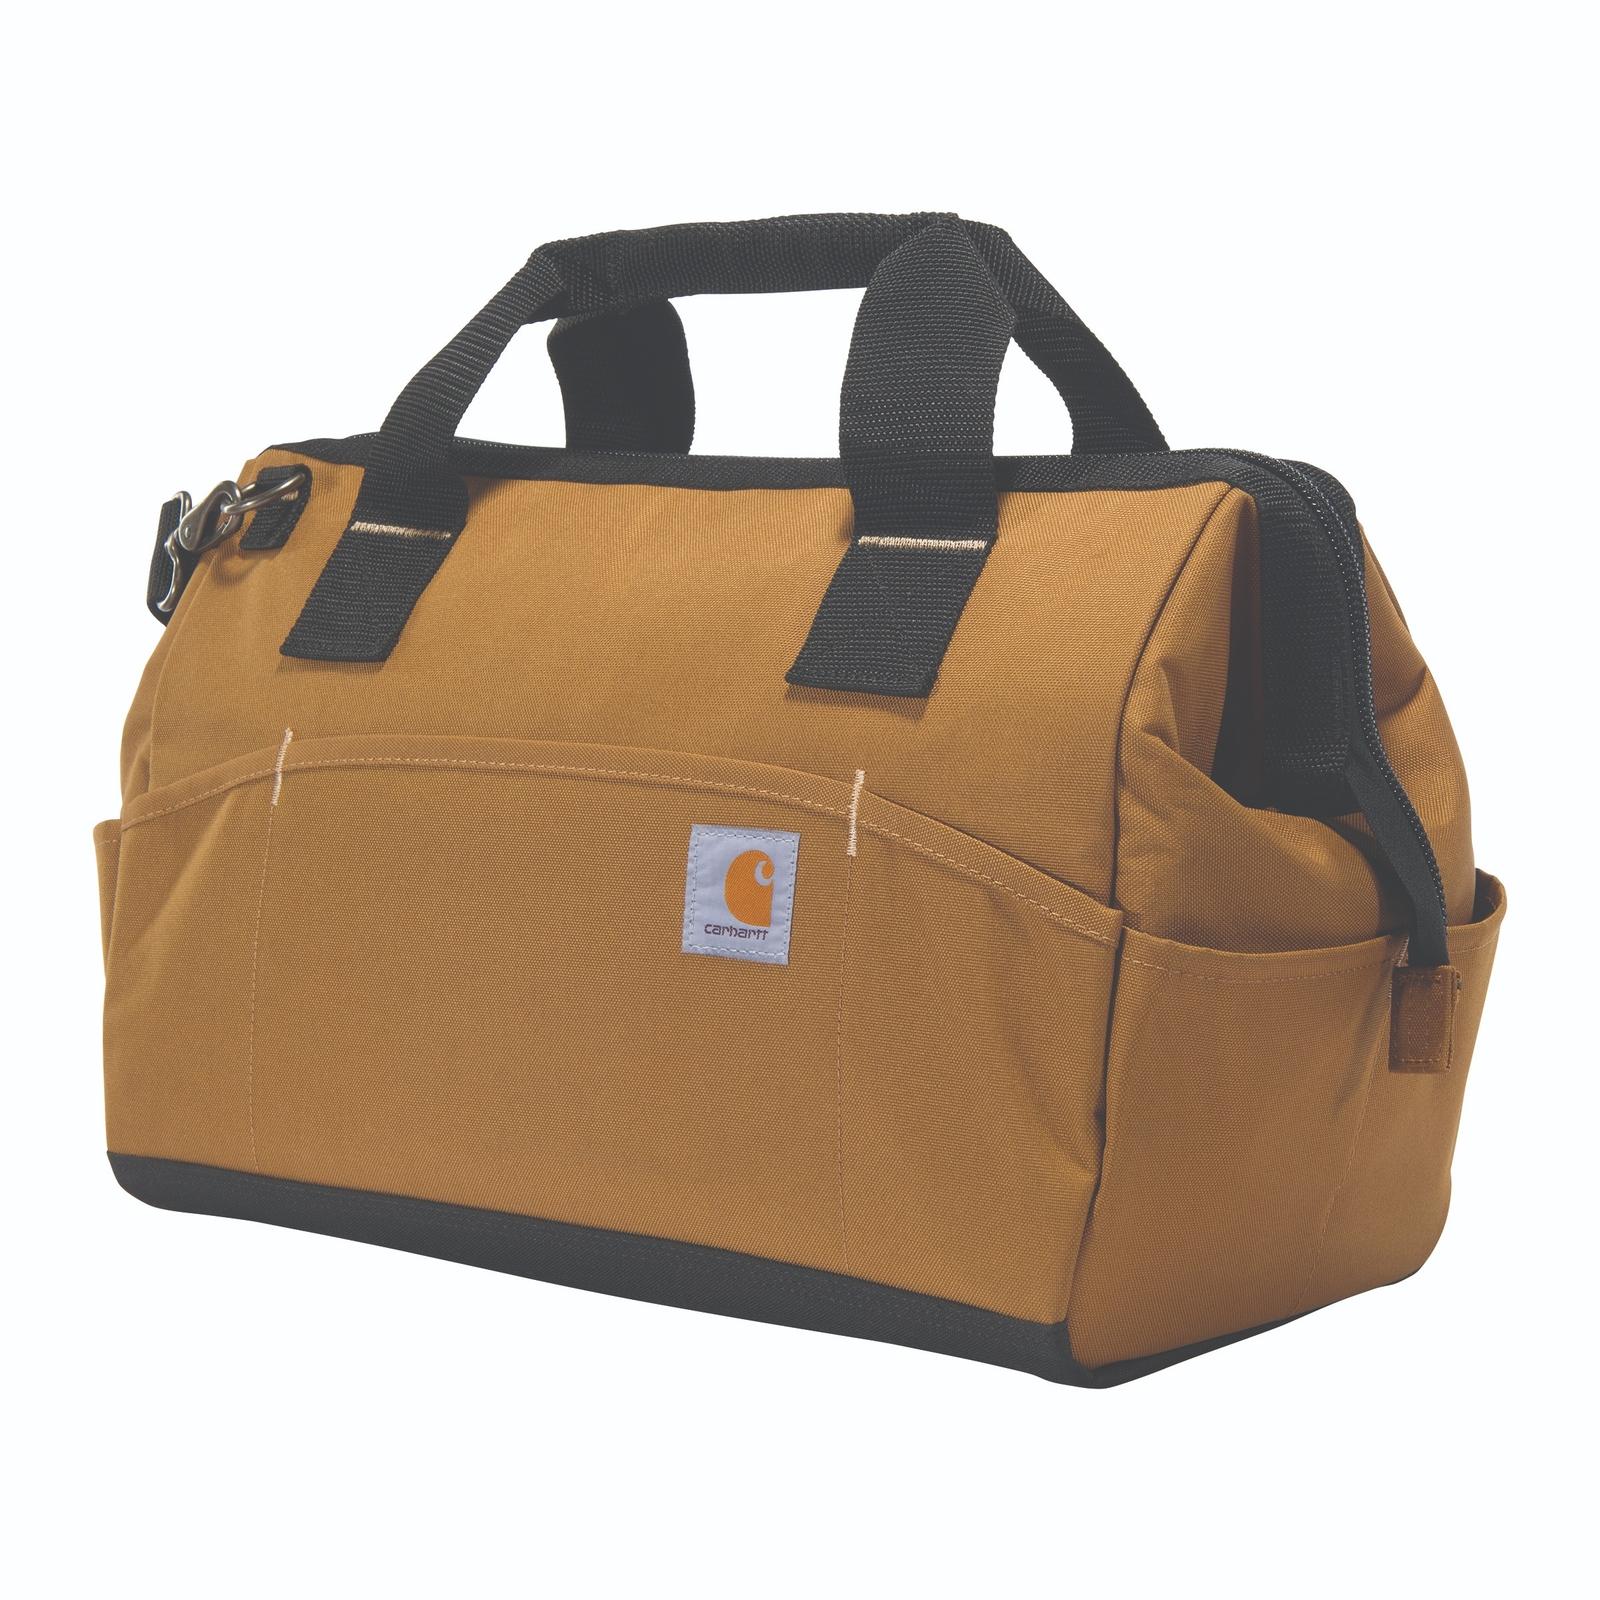 Carhart 16-Inch 17 Pocket Midweight Tool Bag